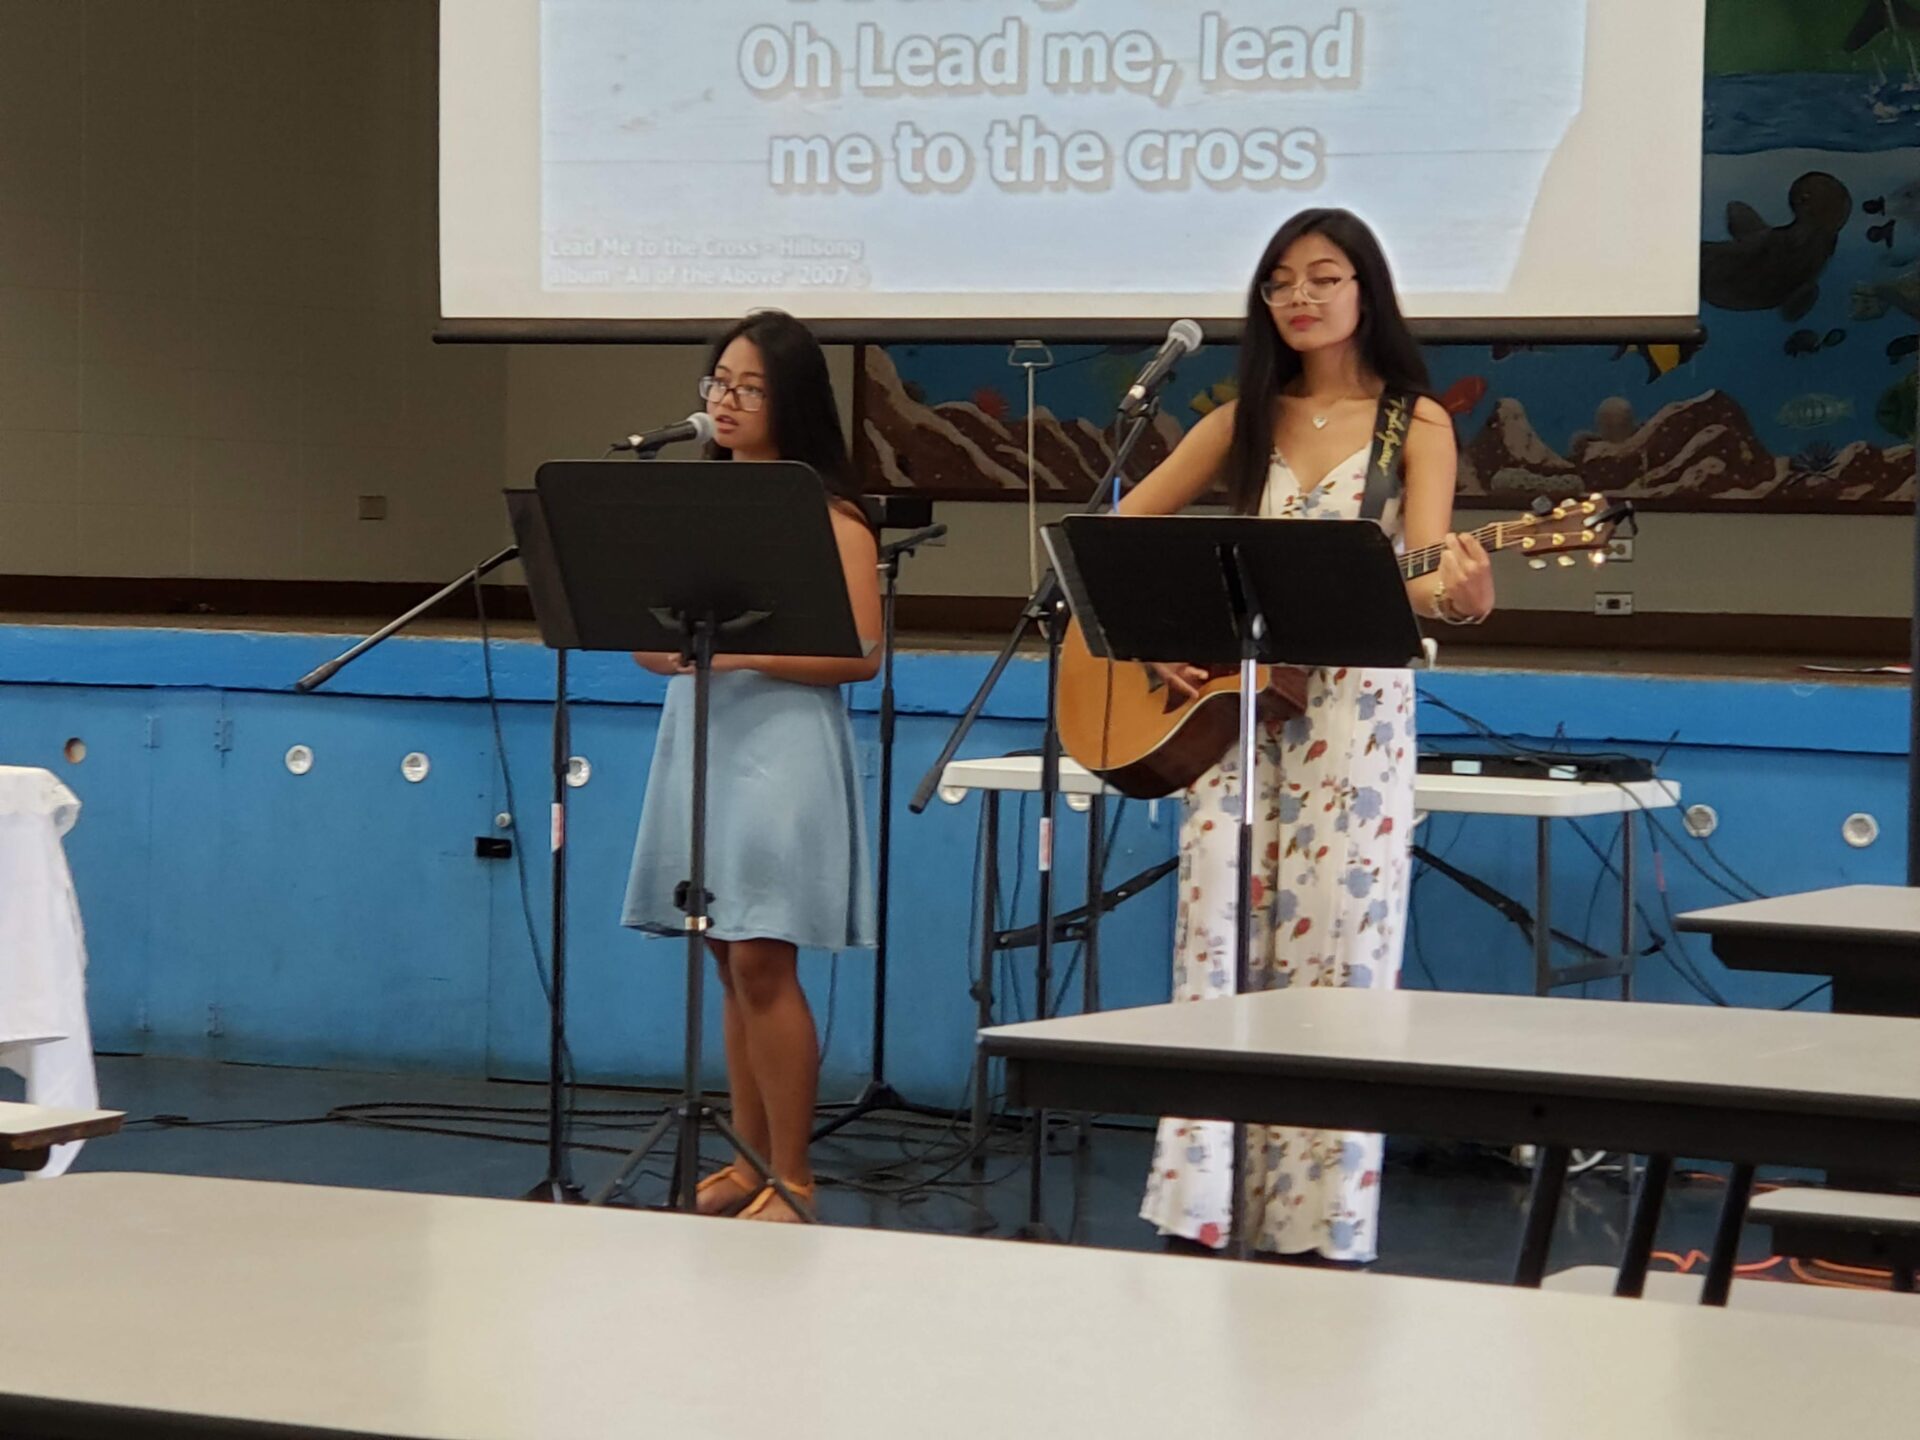 Two girls sing a song at an event.